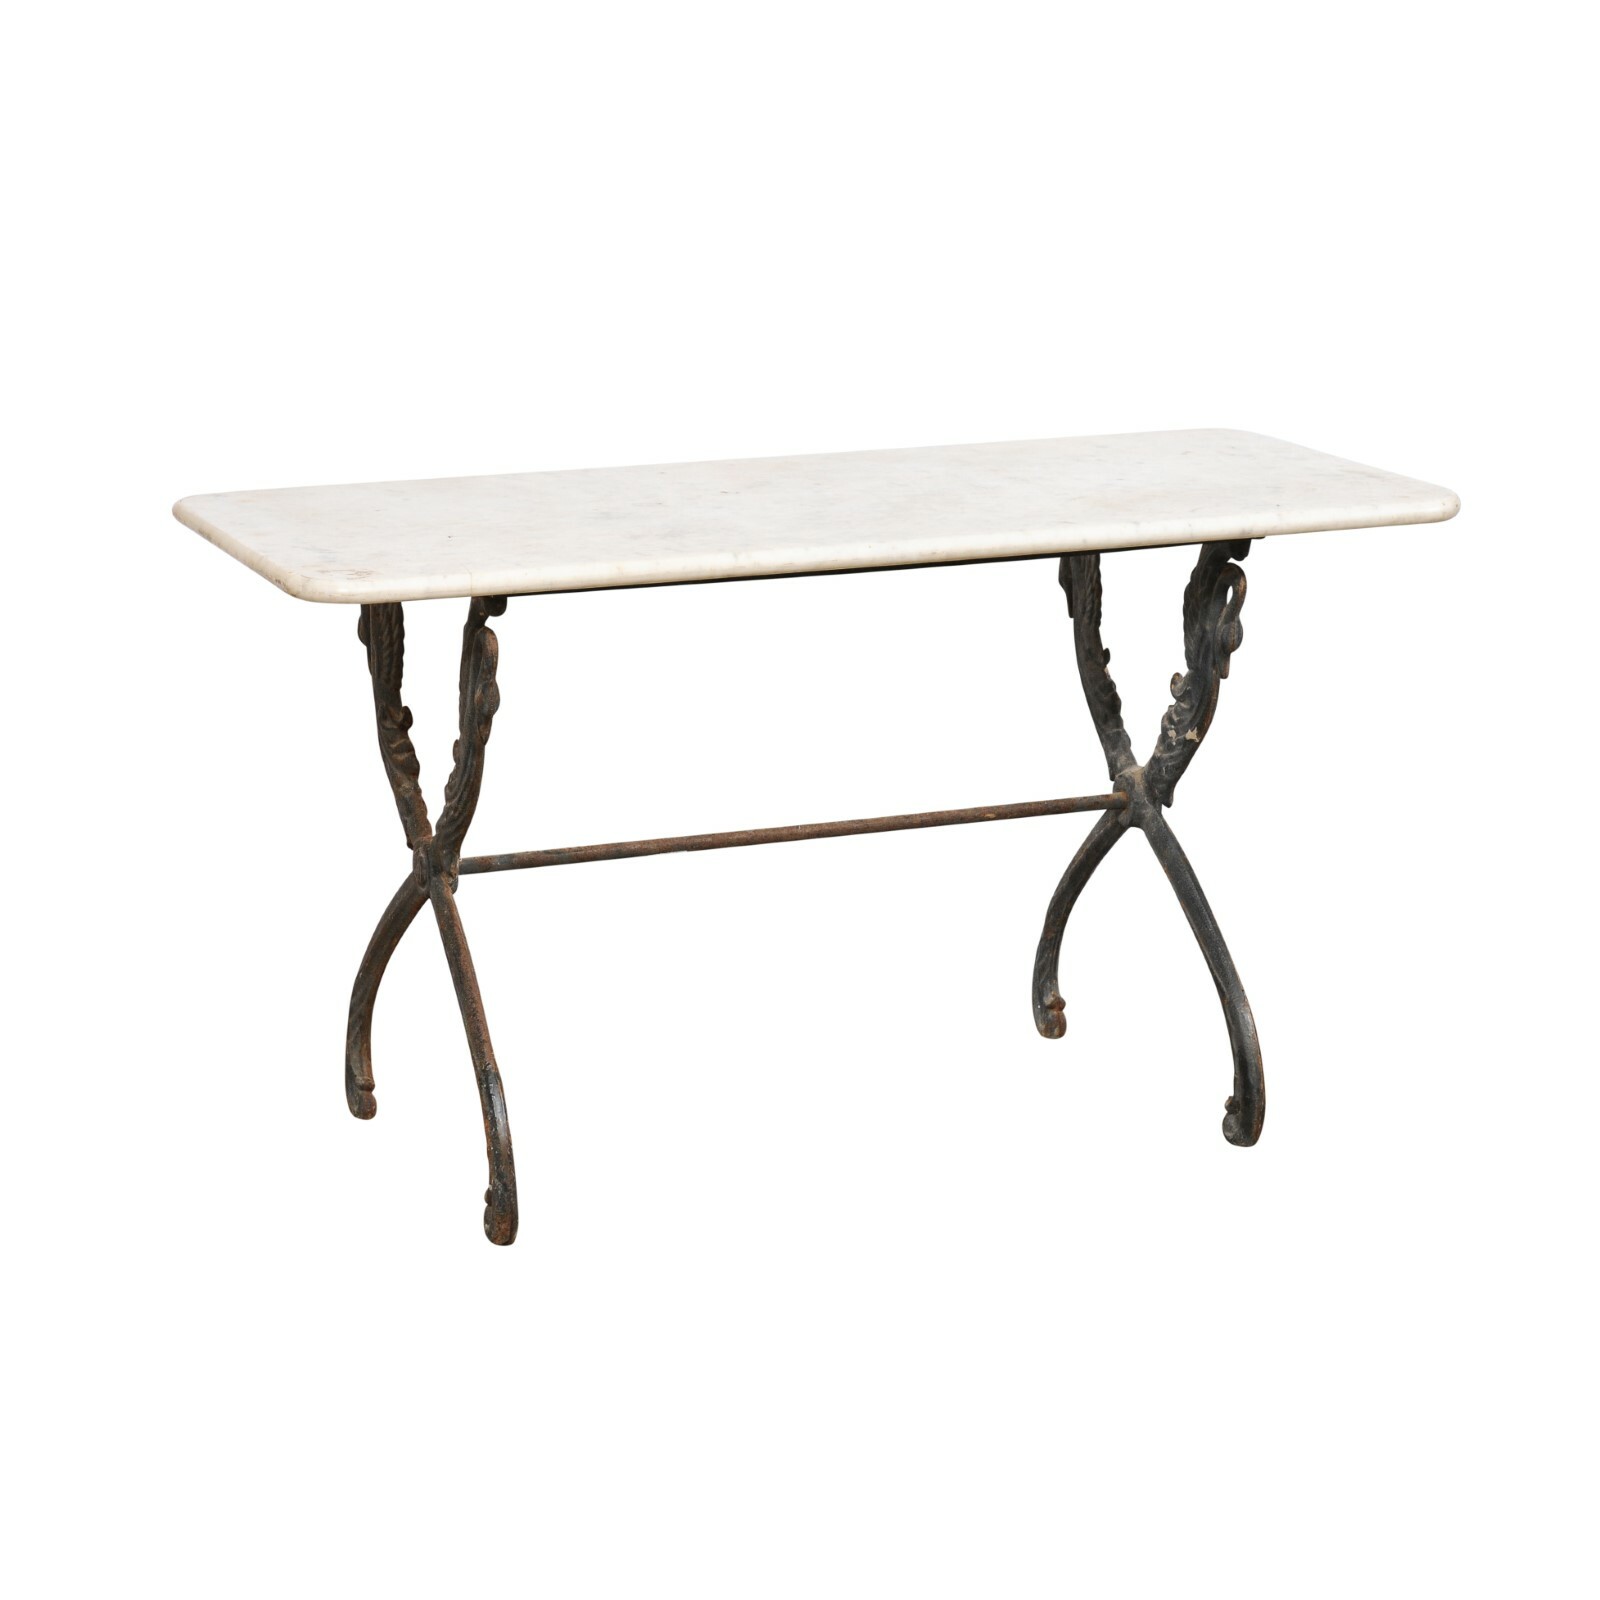 French Marble Top Table w/Iron "Swan" Legs